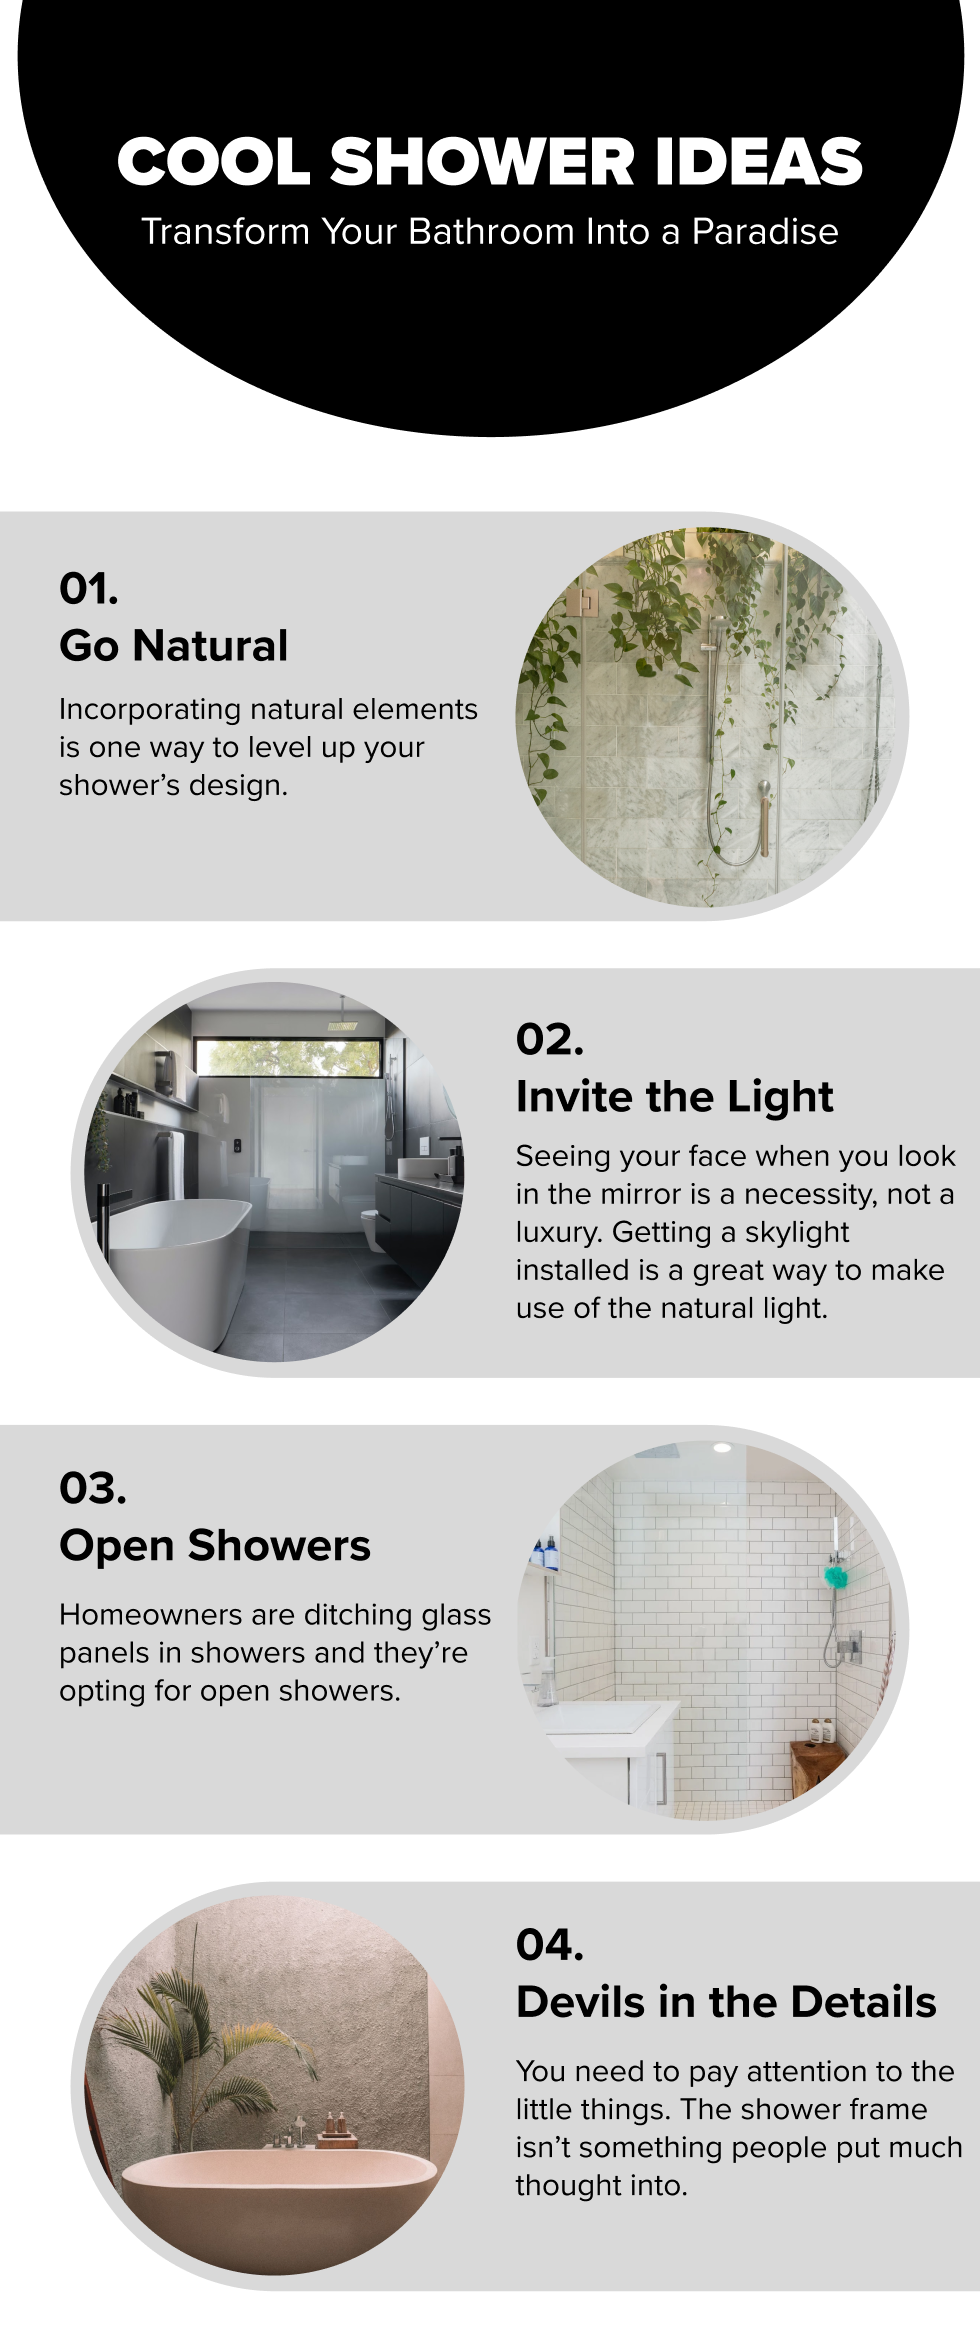 Cool Shower Ideas Infographic